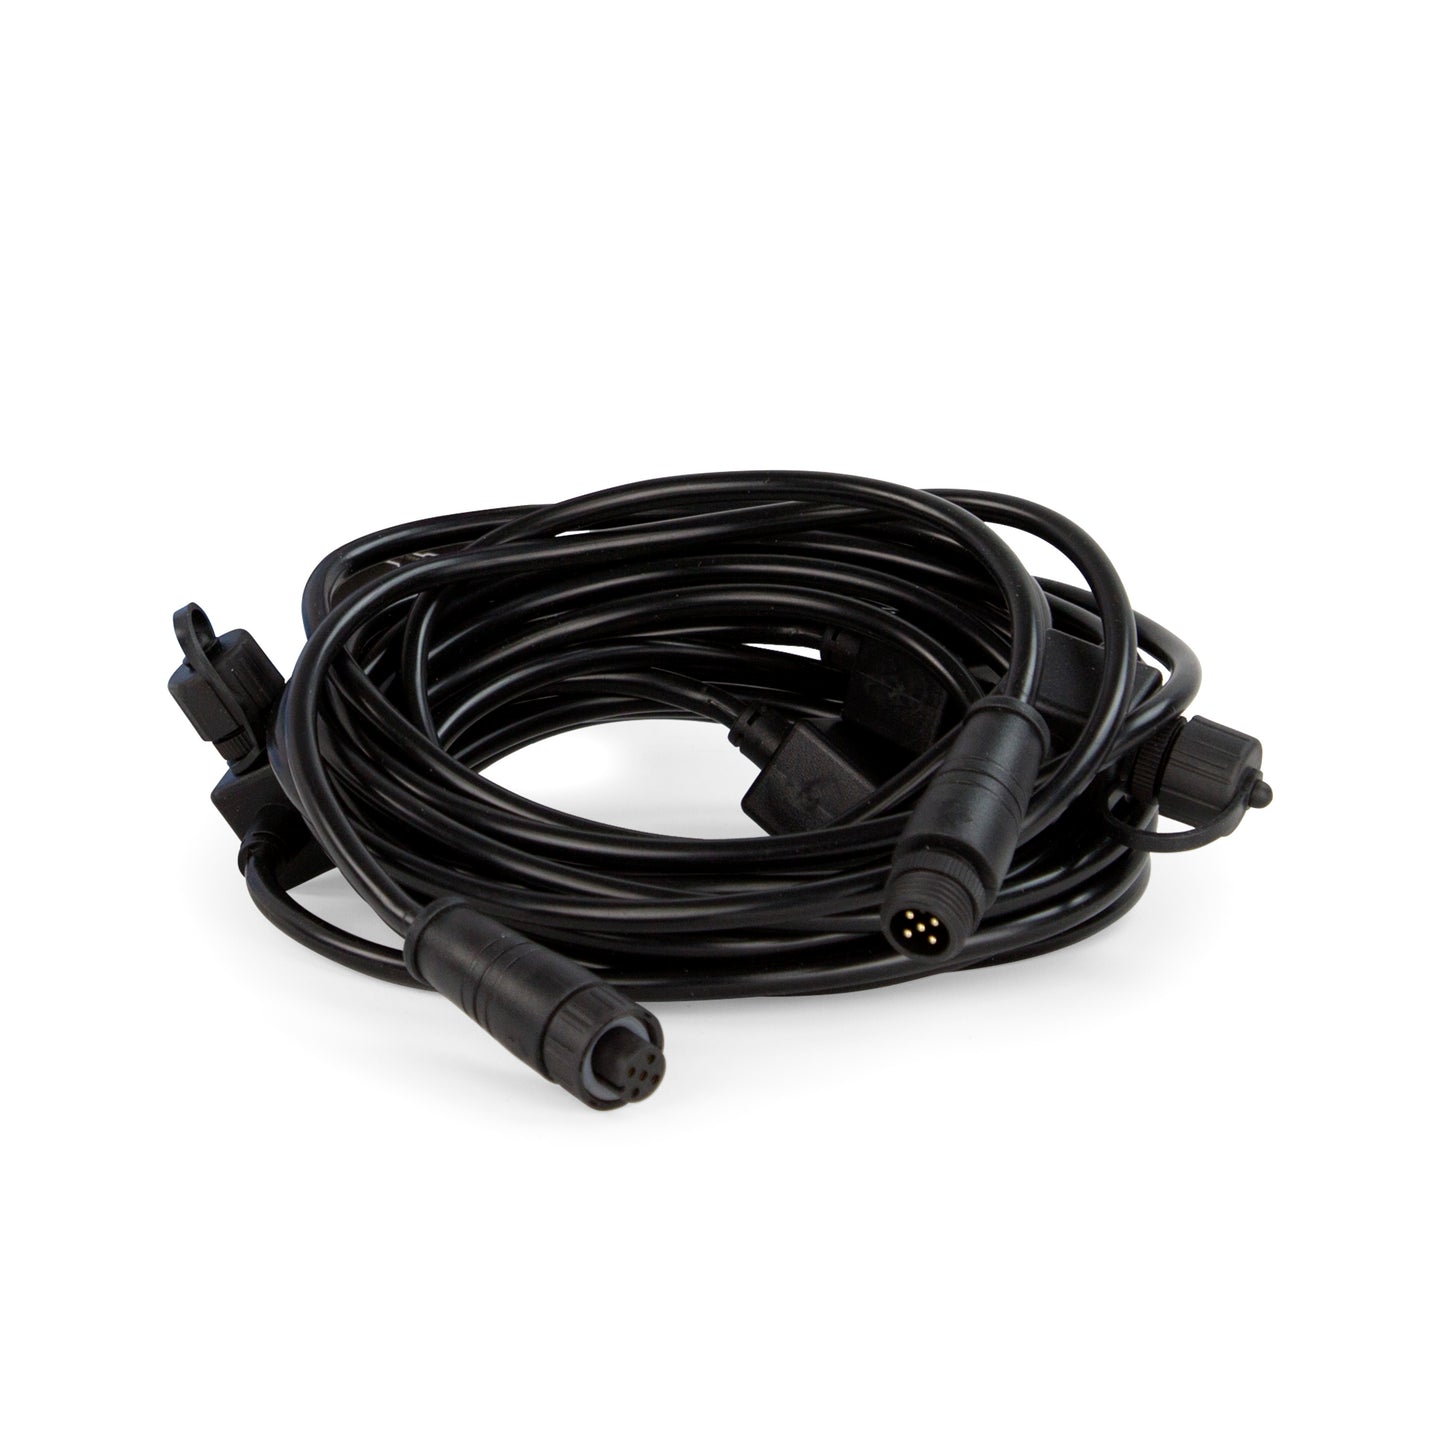 LED EXTENSION CABLE - 7.5m 5-OUTLET - COLOUR-CHANGING LIGHTING - UK - WaterFeature.Shop